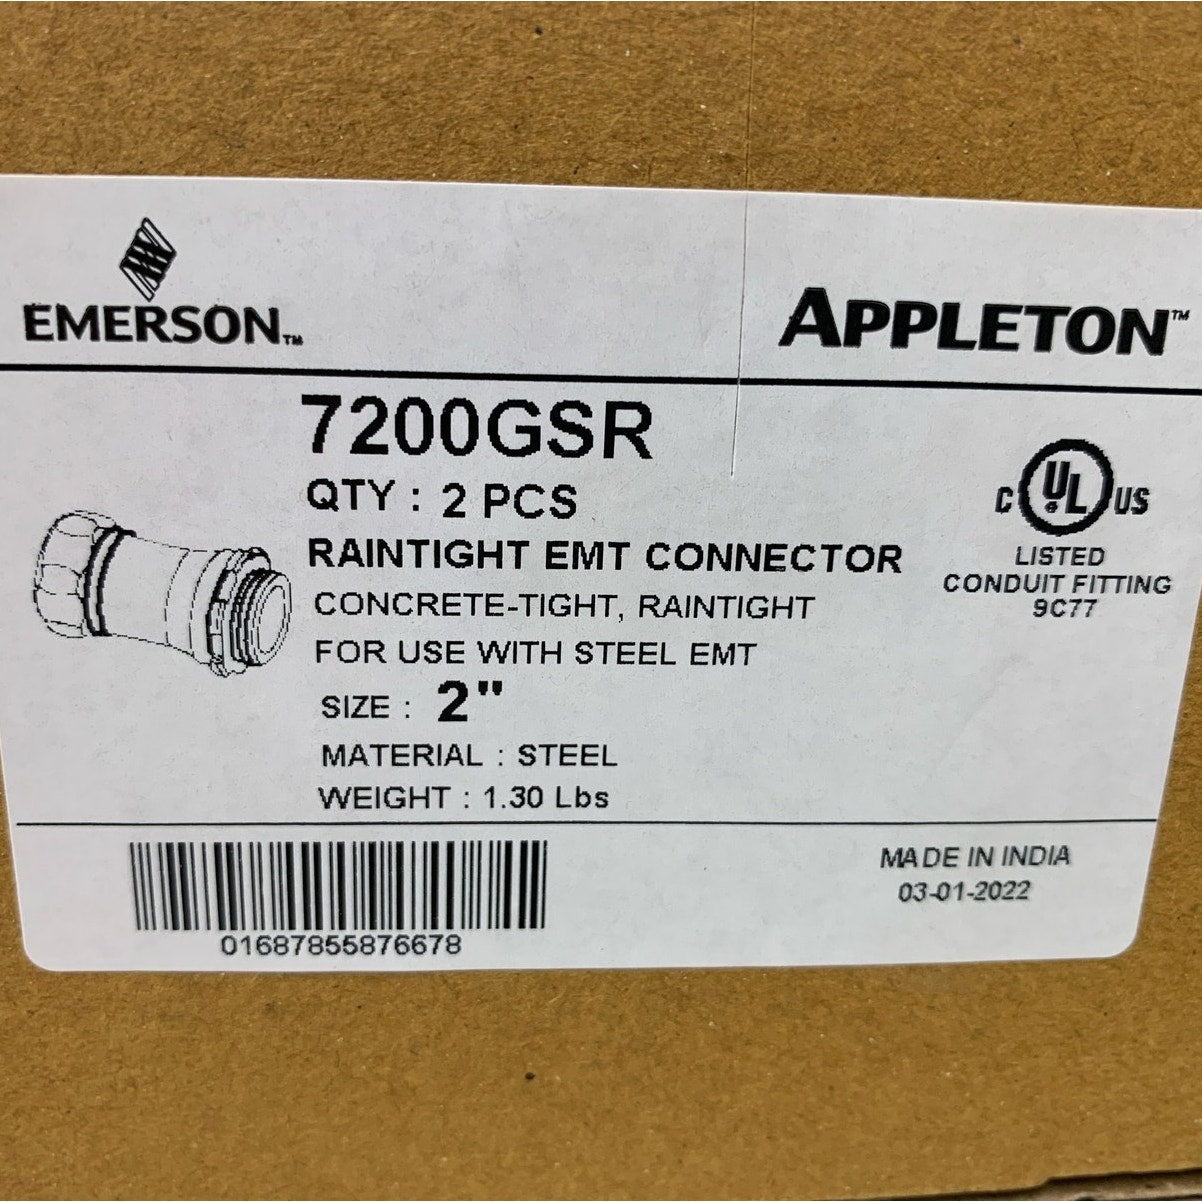 2 New in Box Appleton 7200GSR 2" Raintight Steel EMG Connector for Use with EMT